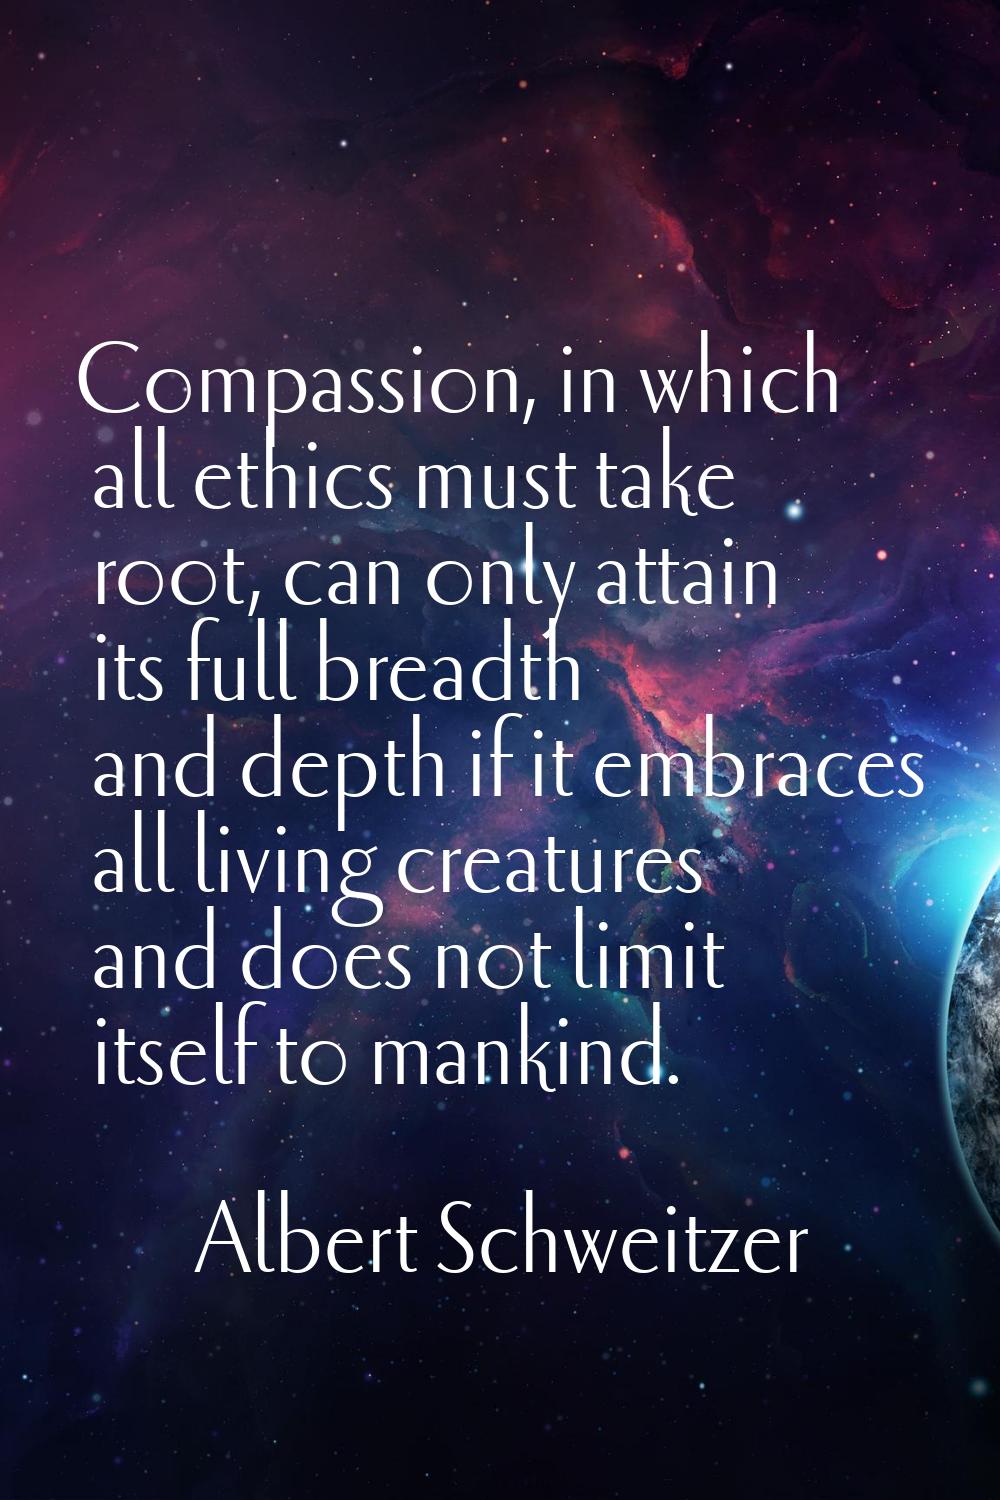 Compassion, in which all ethics must take root, can only attain its full breadth and depth if it em